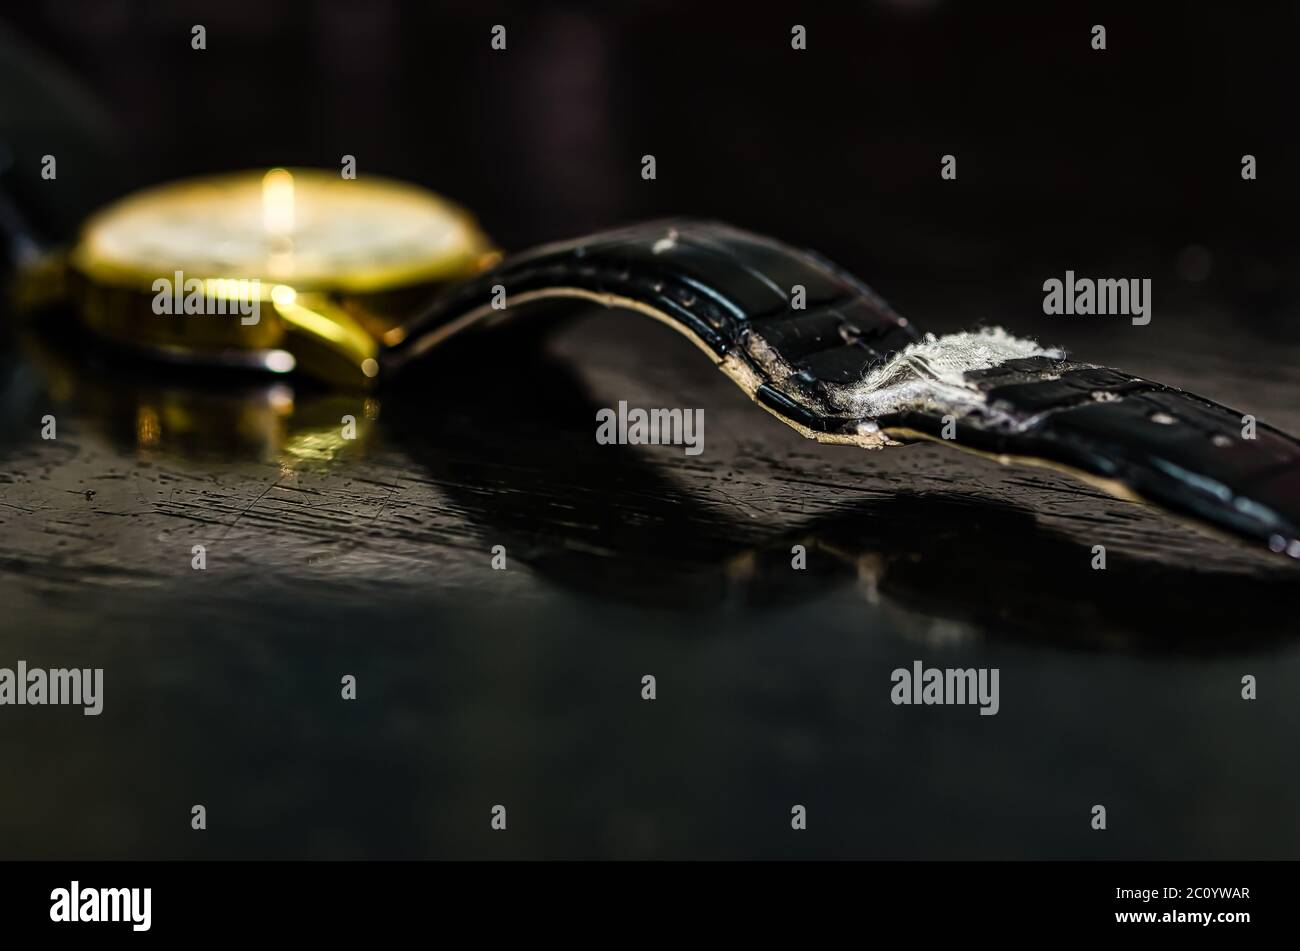 Used and worn out black belt of a golden watch on a worn out black table. Stock Photo